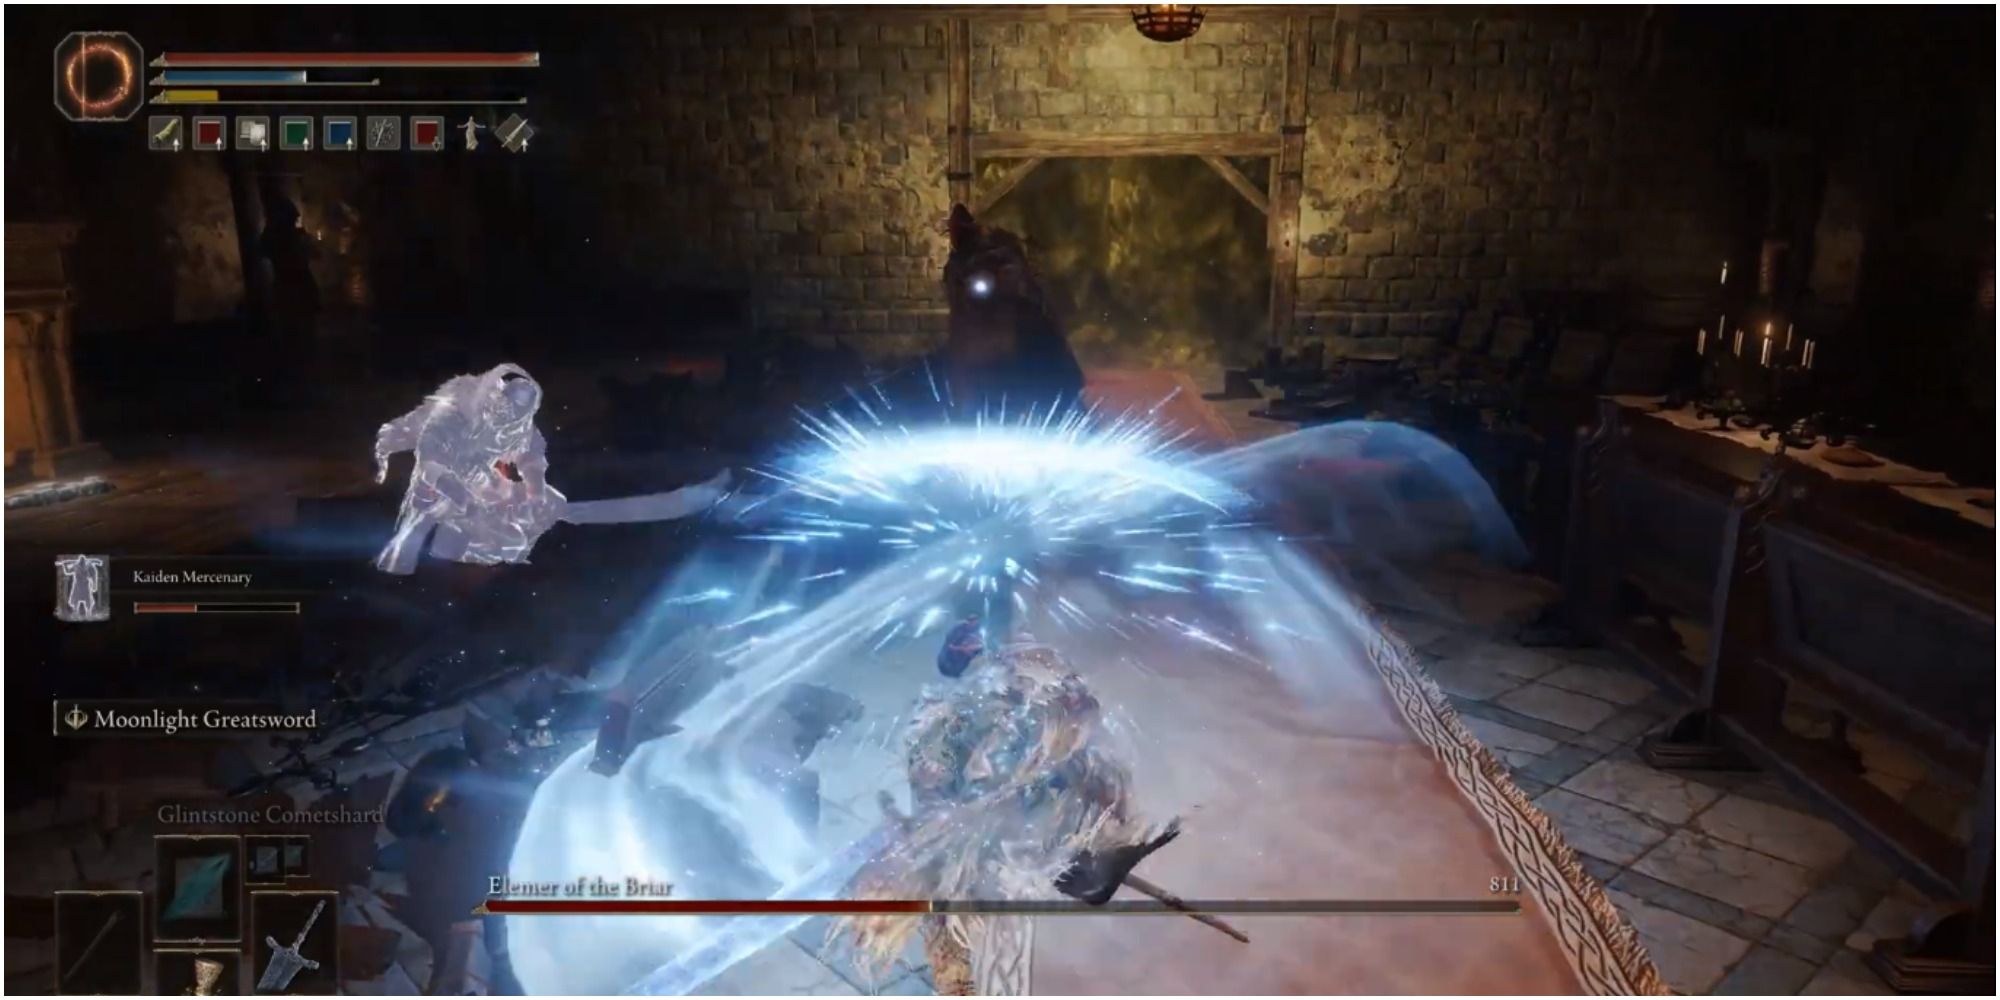 The player using Sorcery to attack the boss.